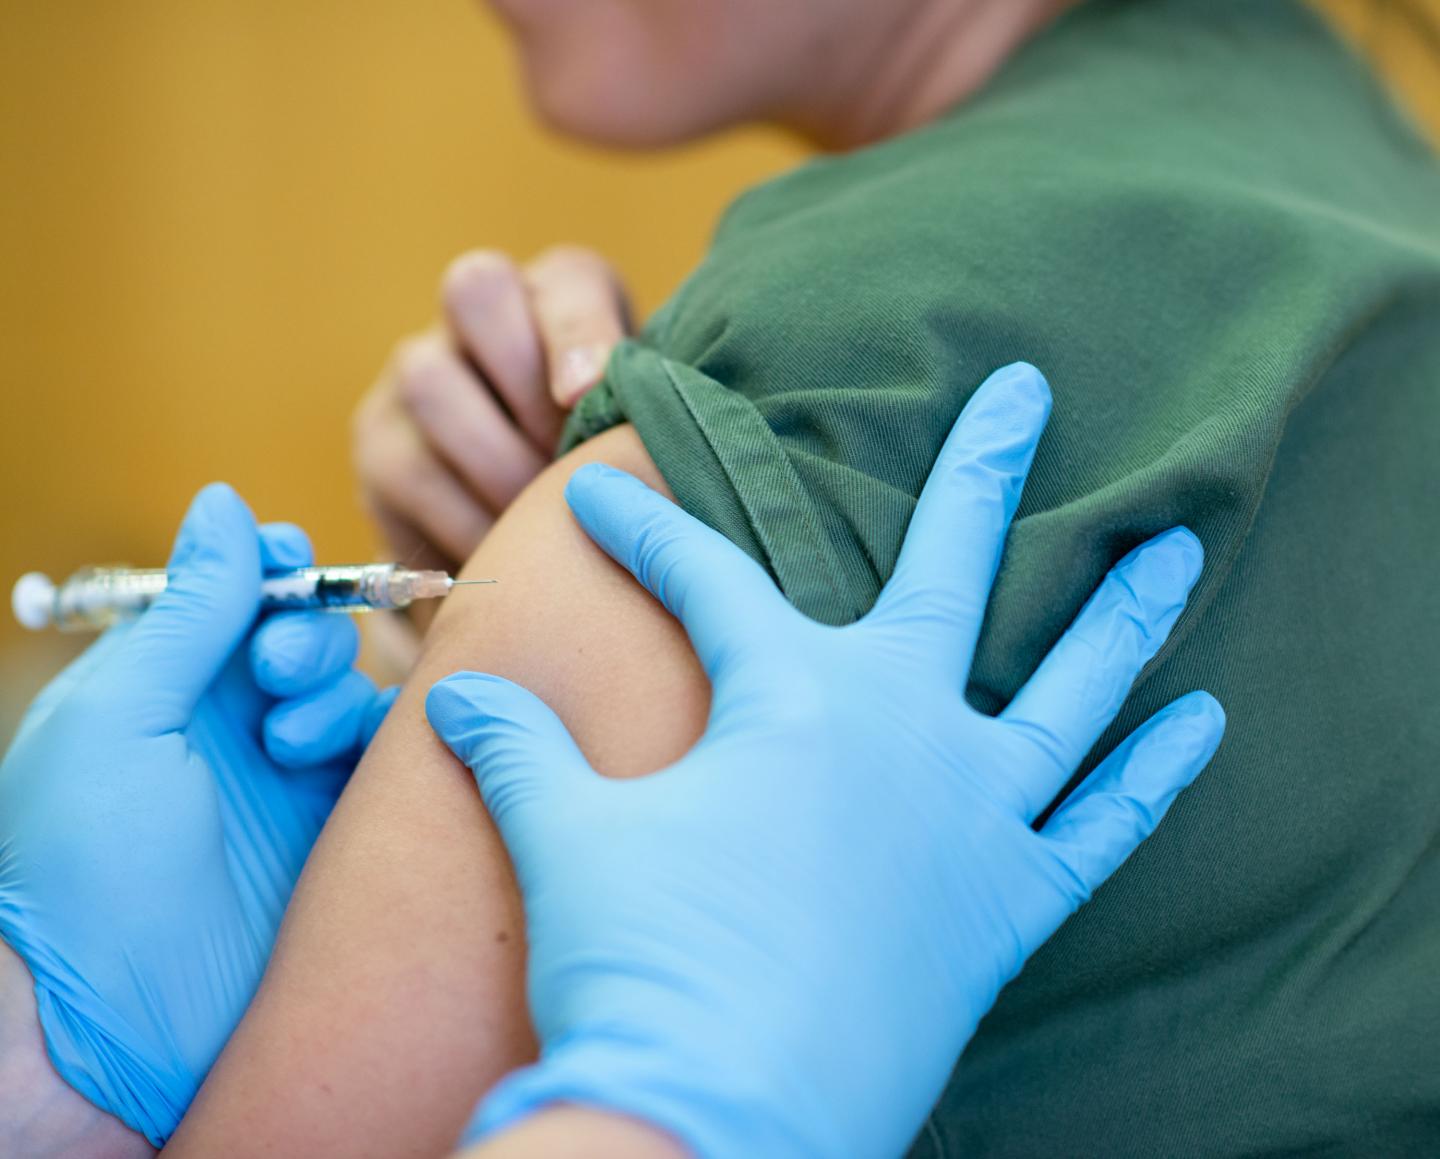 Australian Healthcare Worker Receives a BCG Vaccination